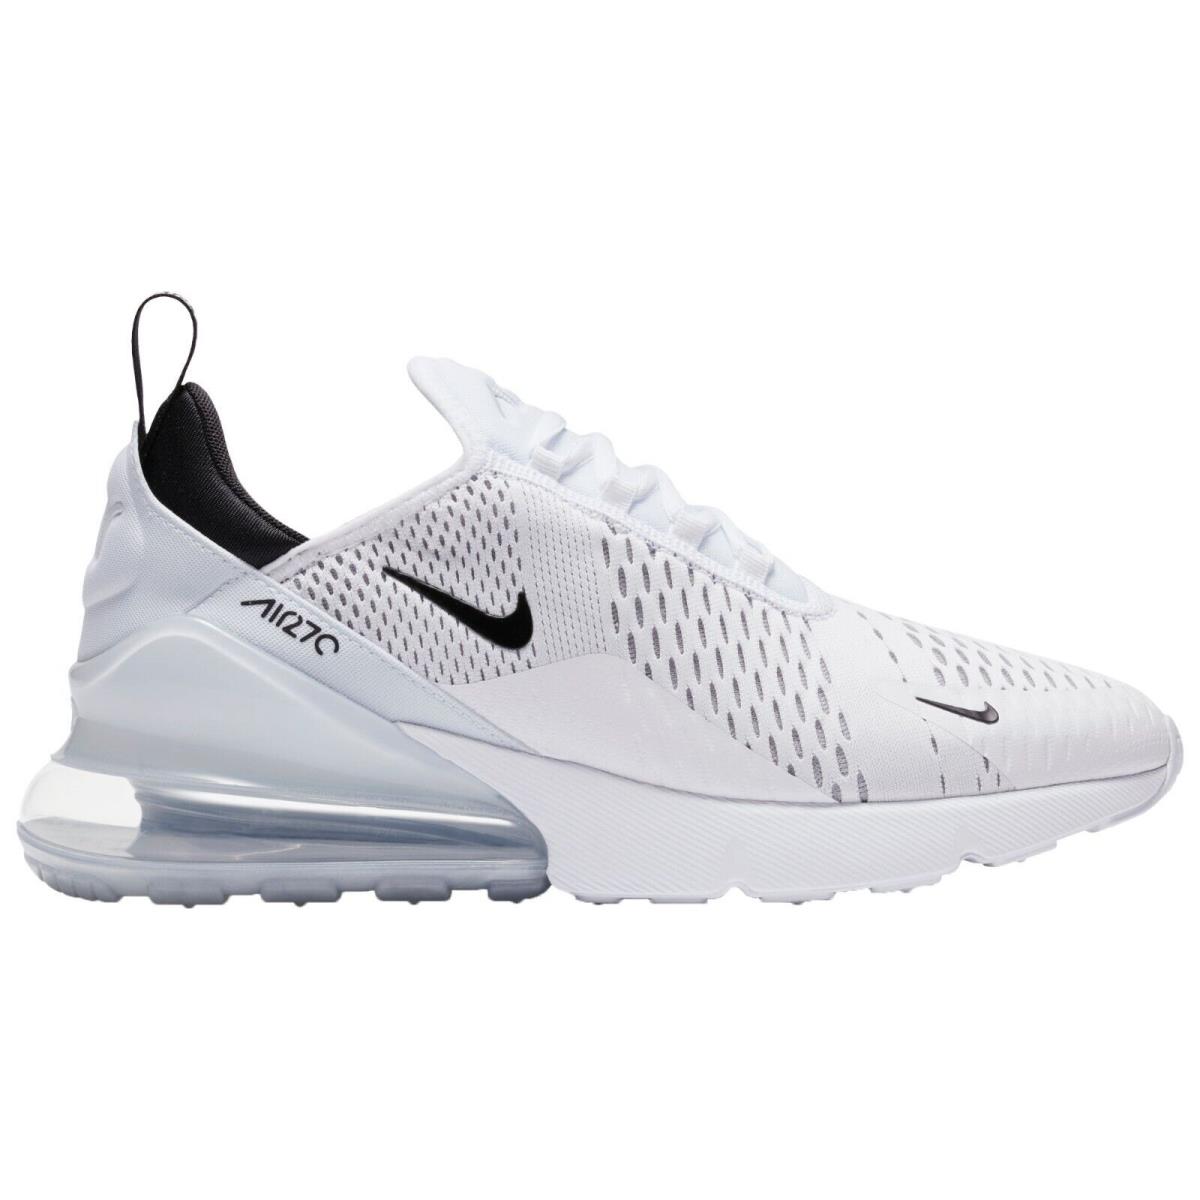 Nike Air Max 270 Men`s Running Casual Shoes US Size 8-13 All Colors White/White/Black